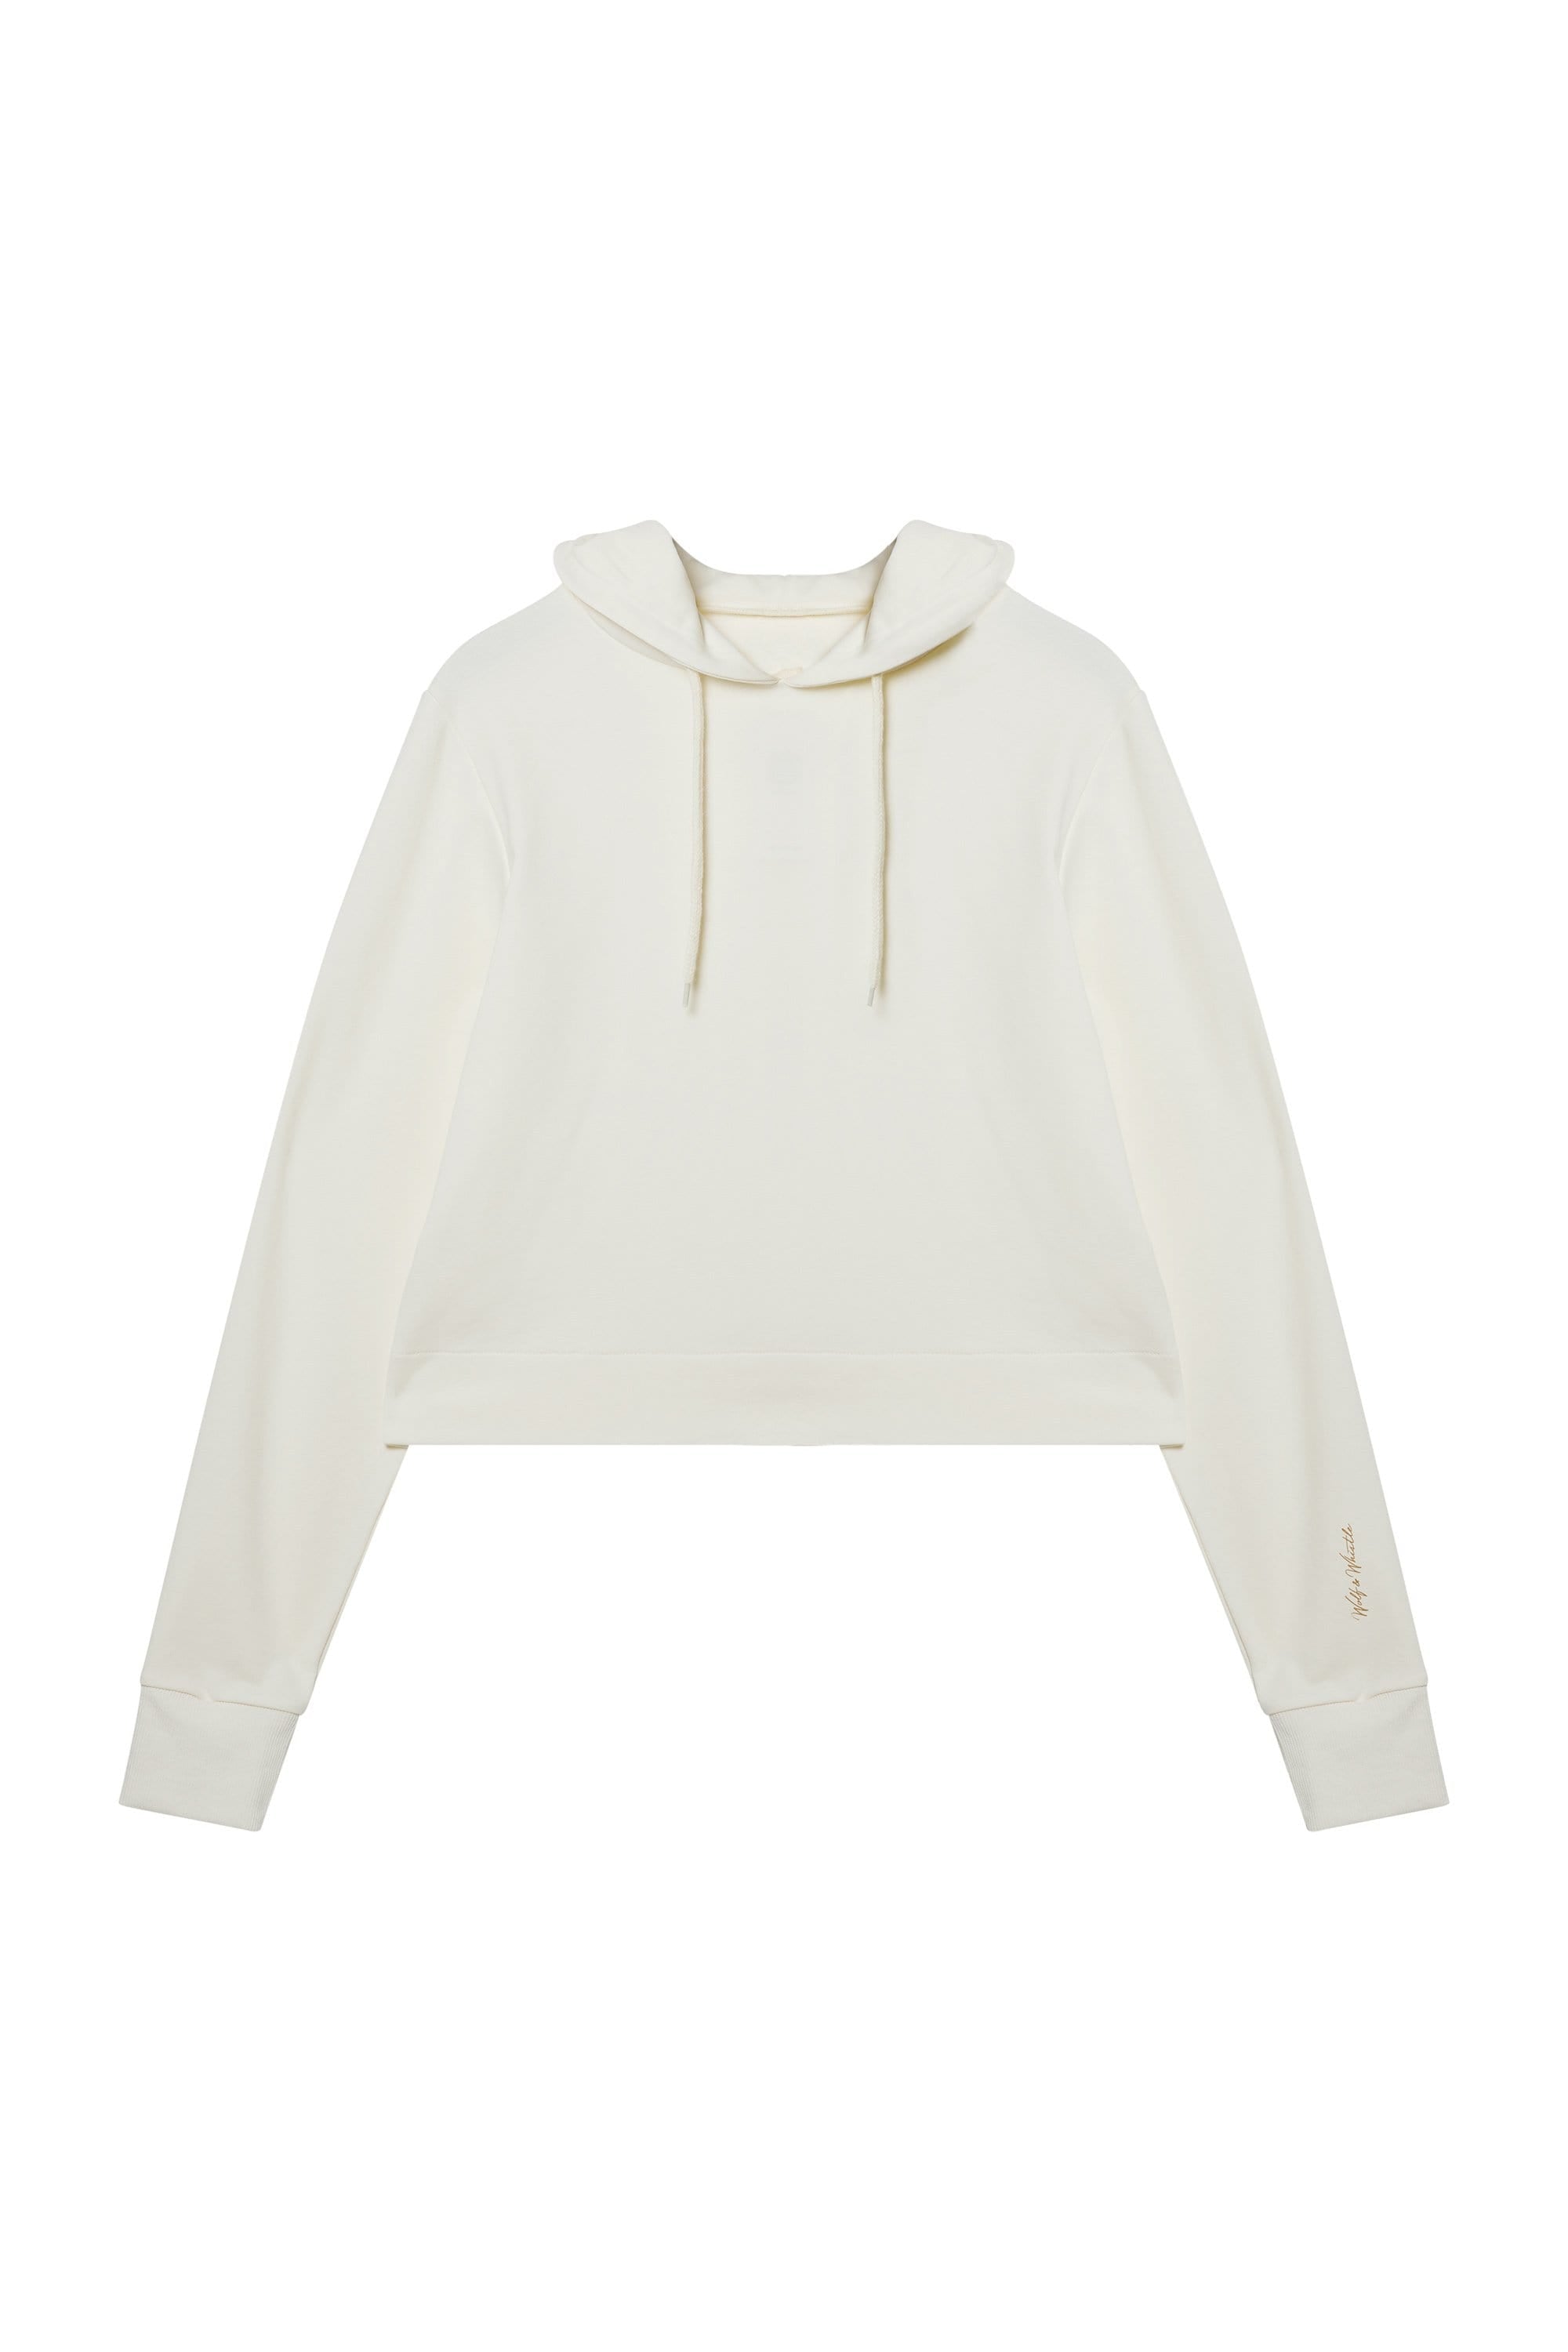 Winter White Hooded Top